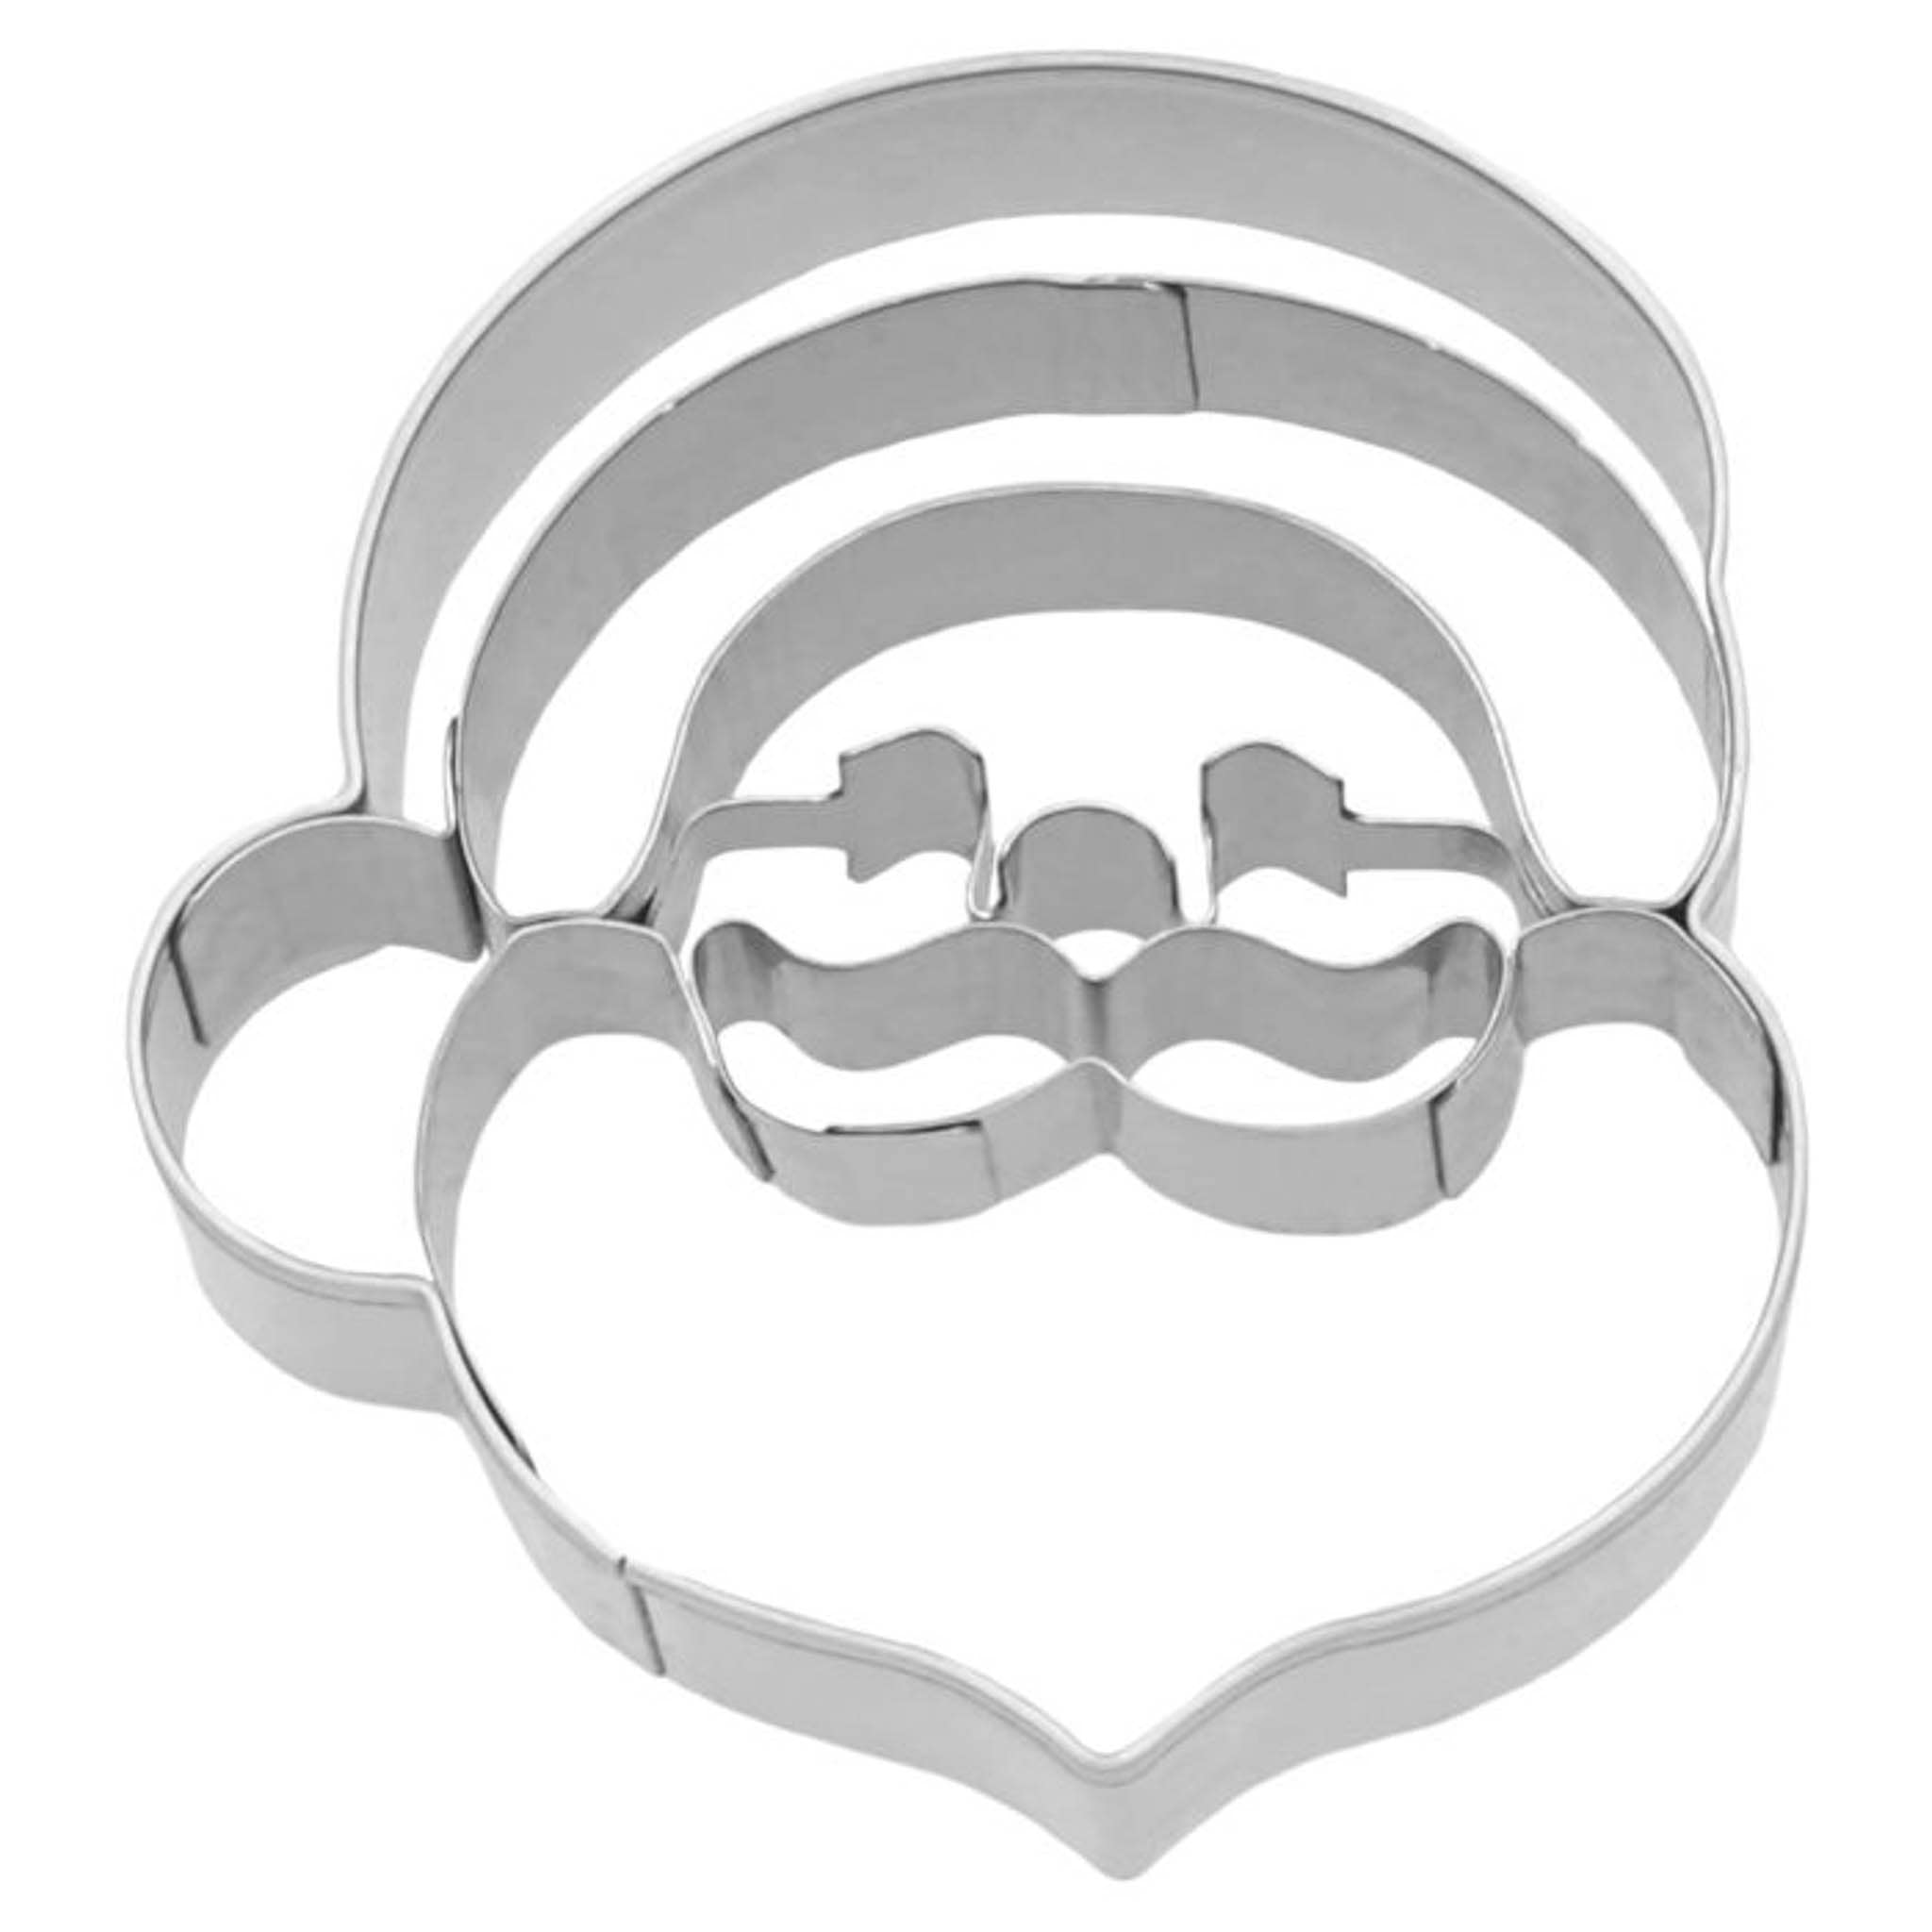 Stainless Steel Santa Claus Cookie Cutter, 6cm